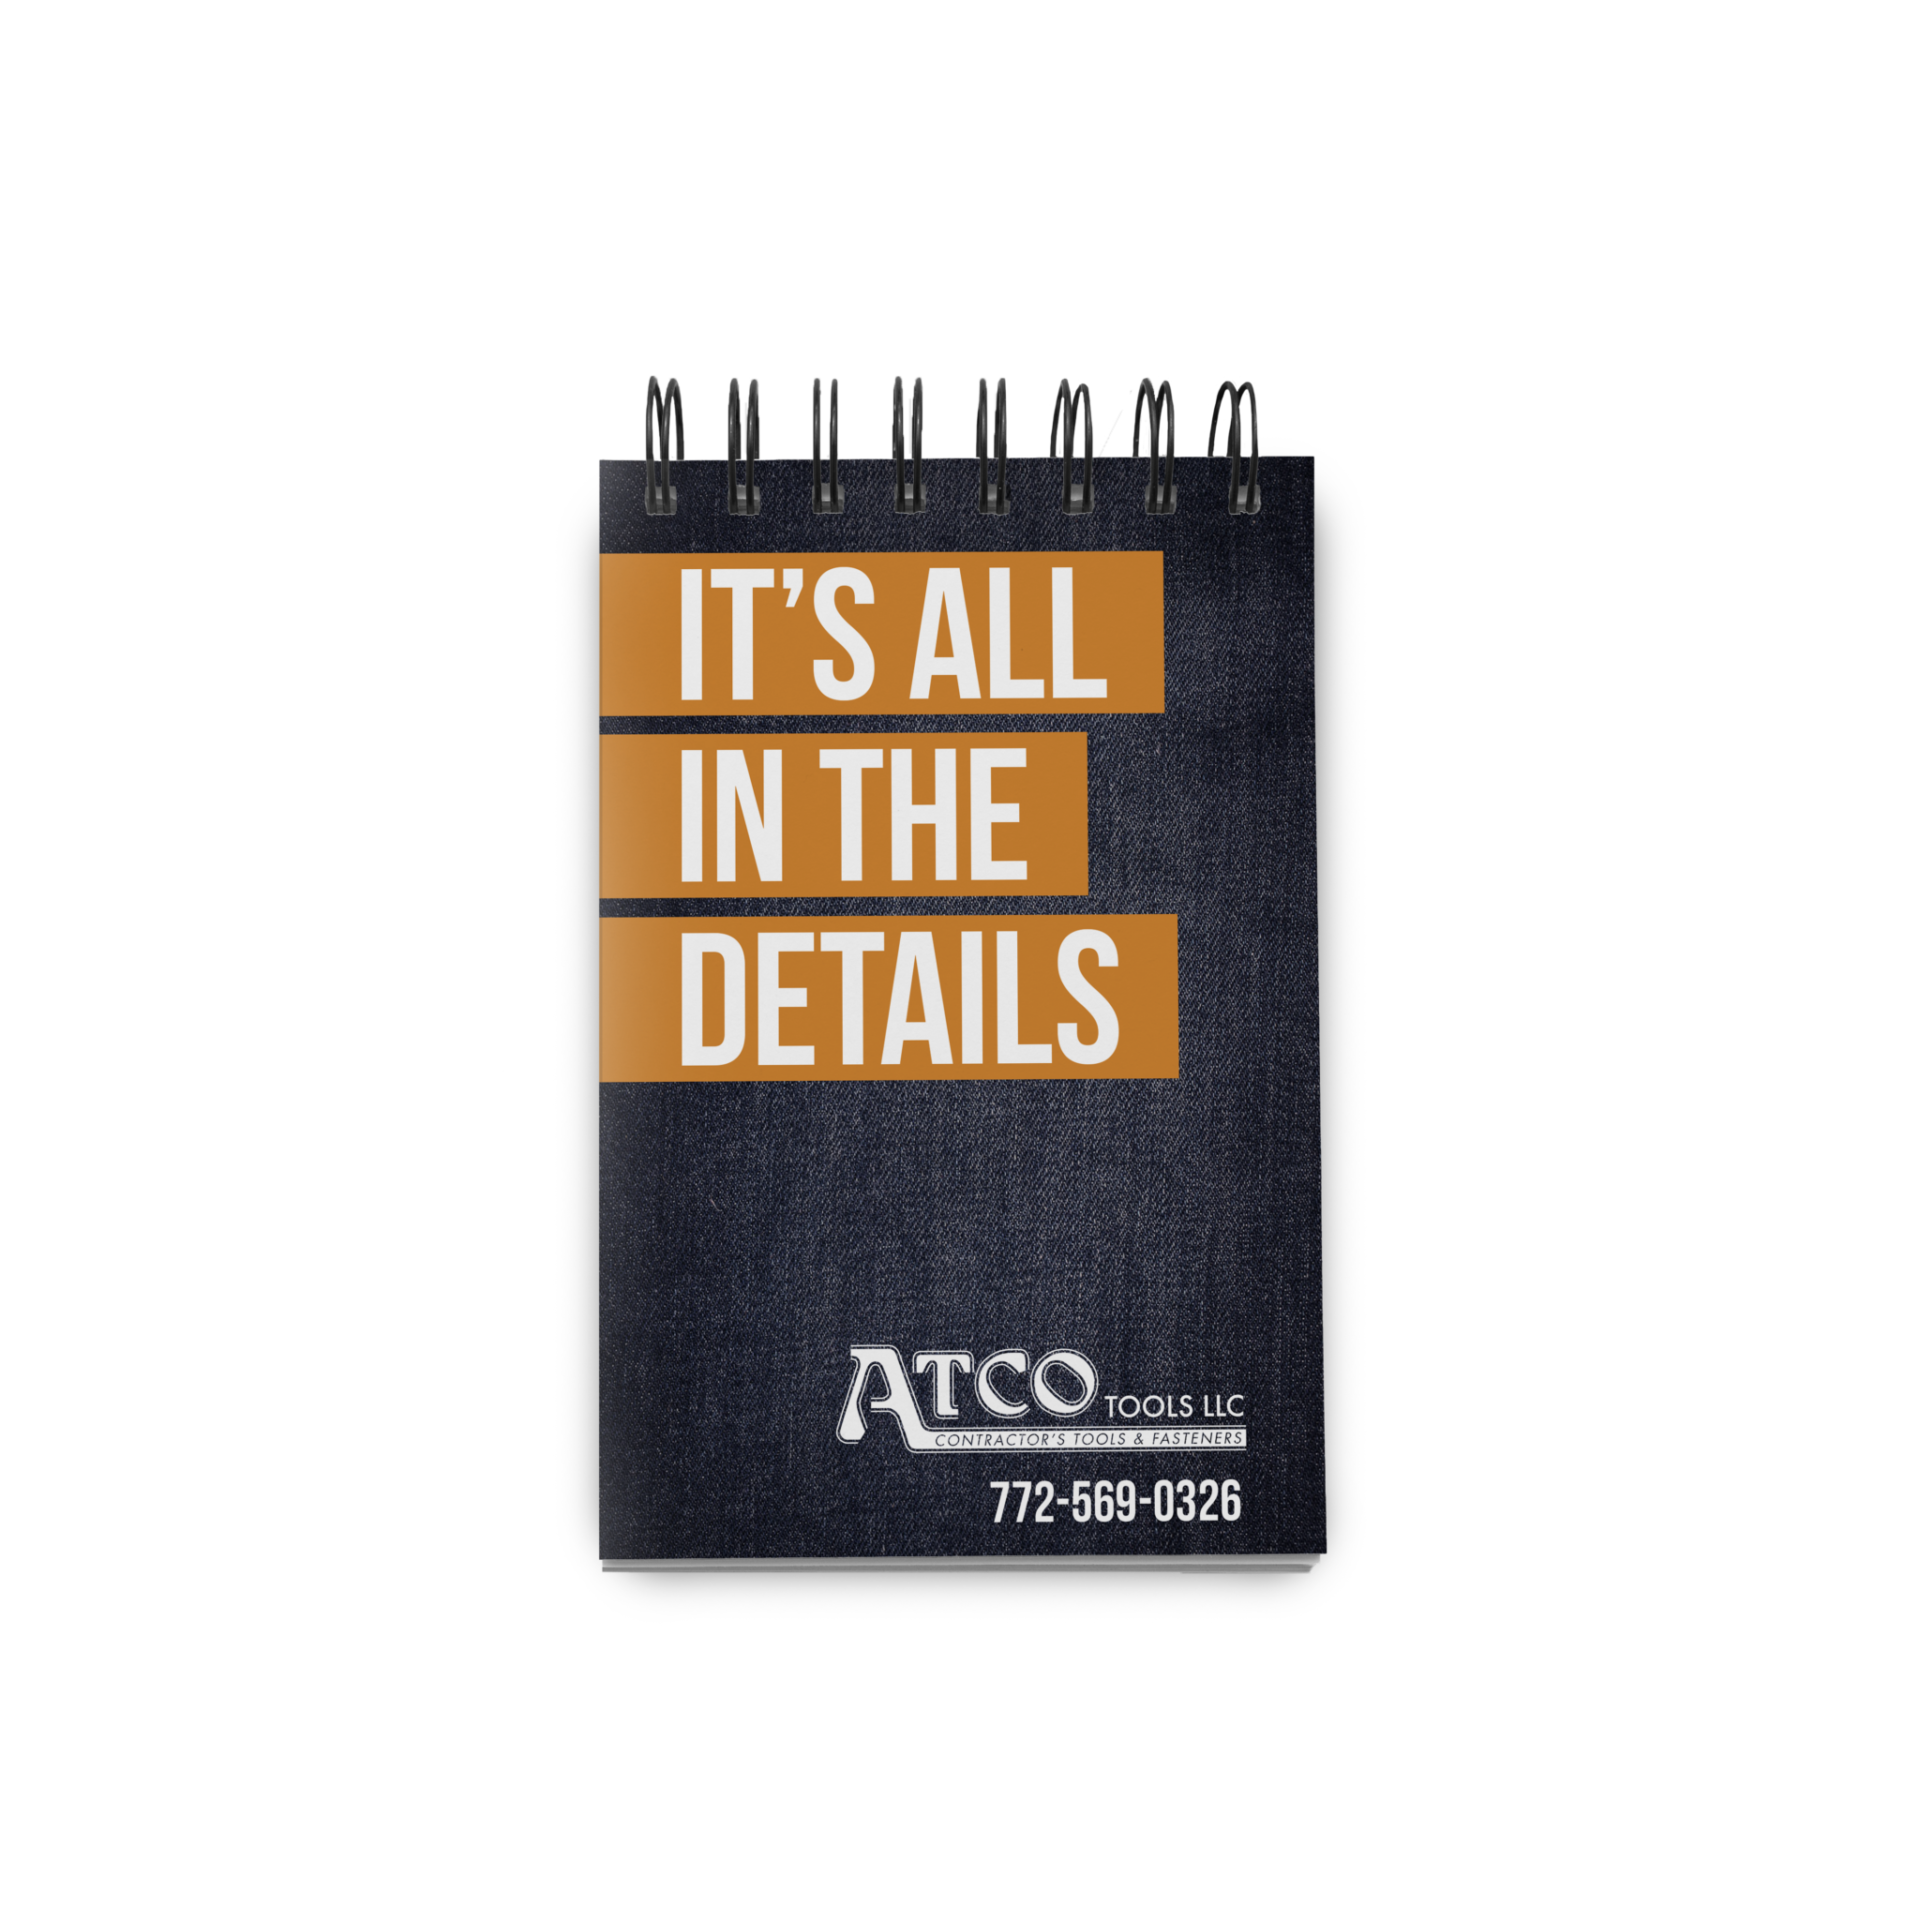 A notepad design for Atco Tools by Ironside's award winning graphic designers